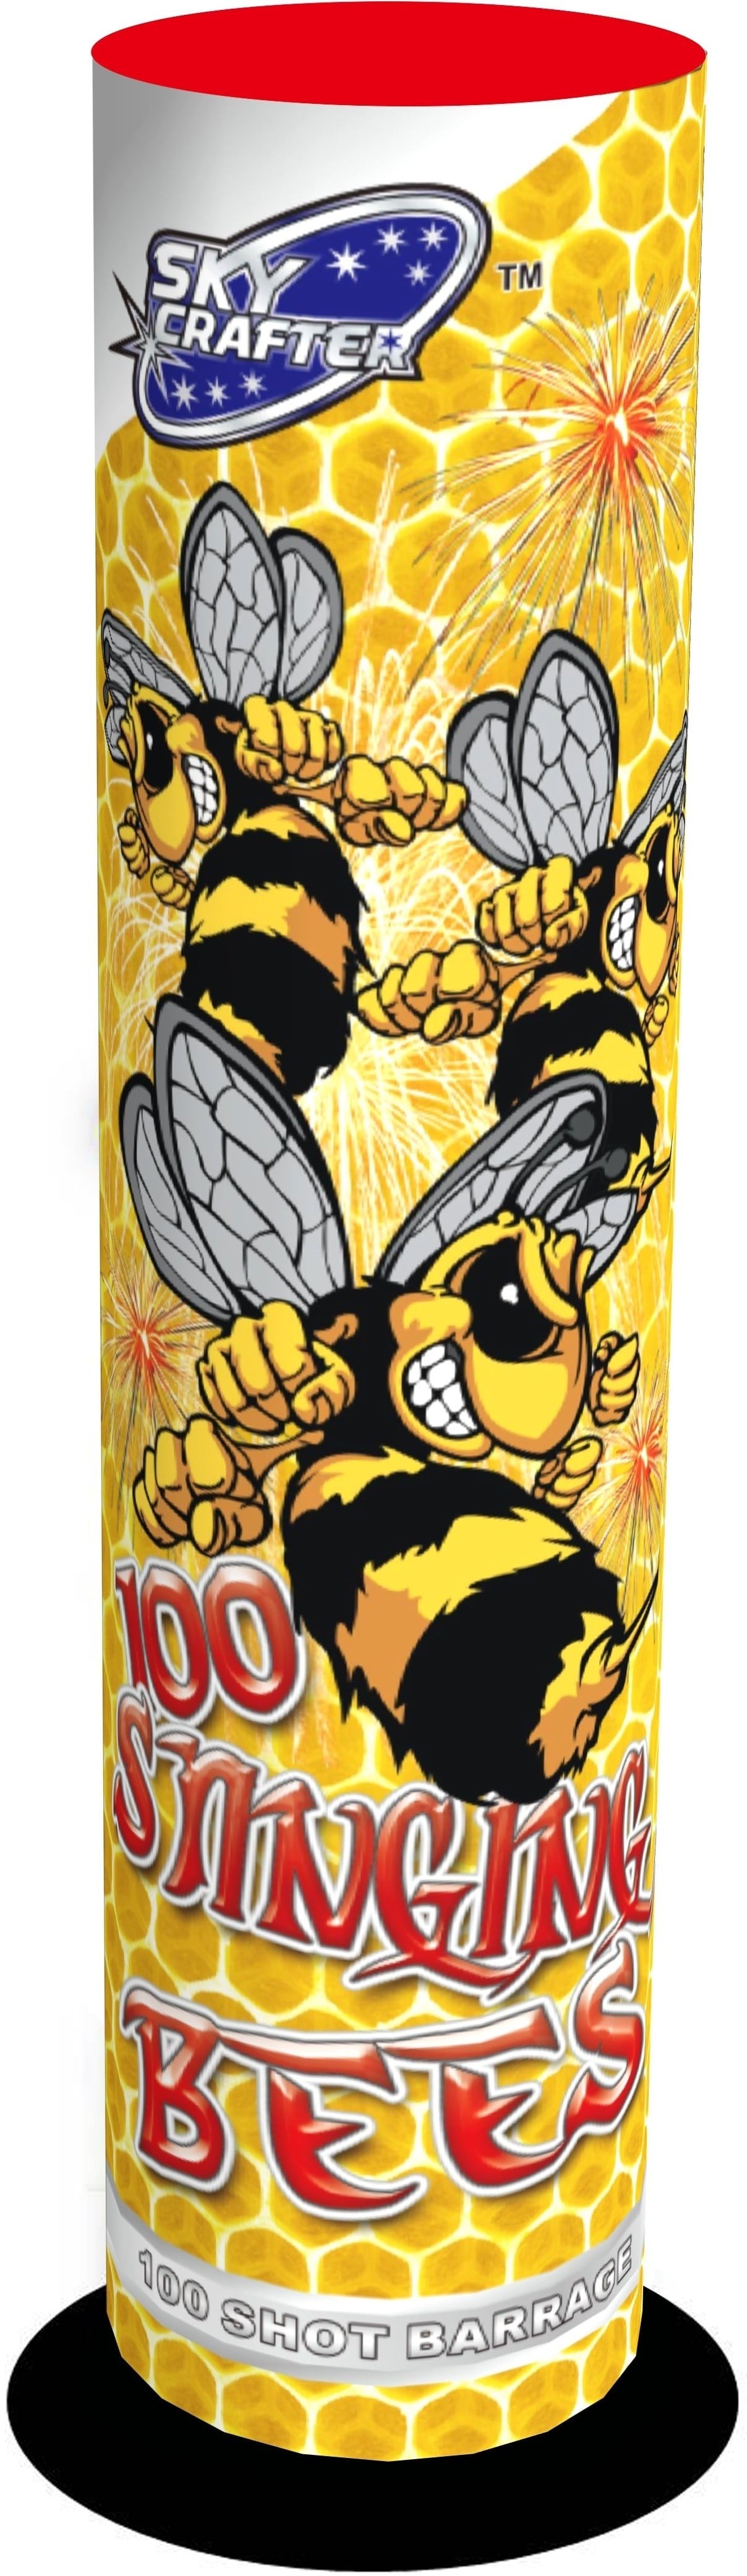 100 Stinging Bees By Skycrafter